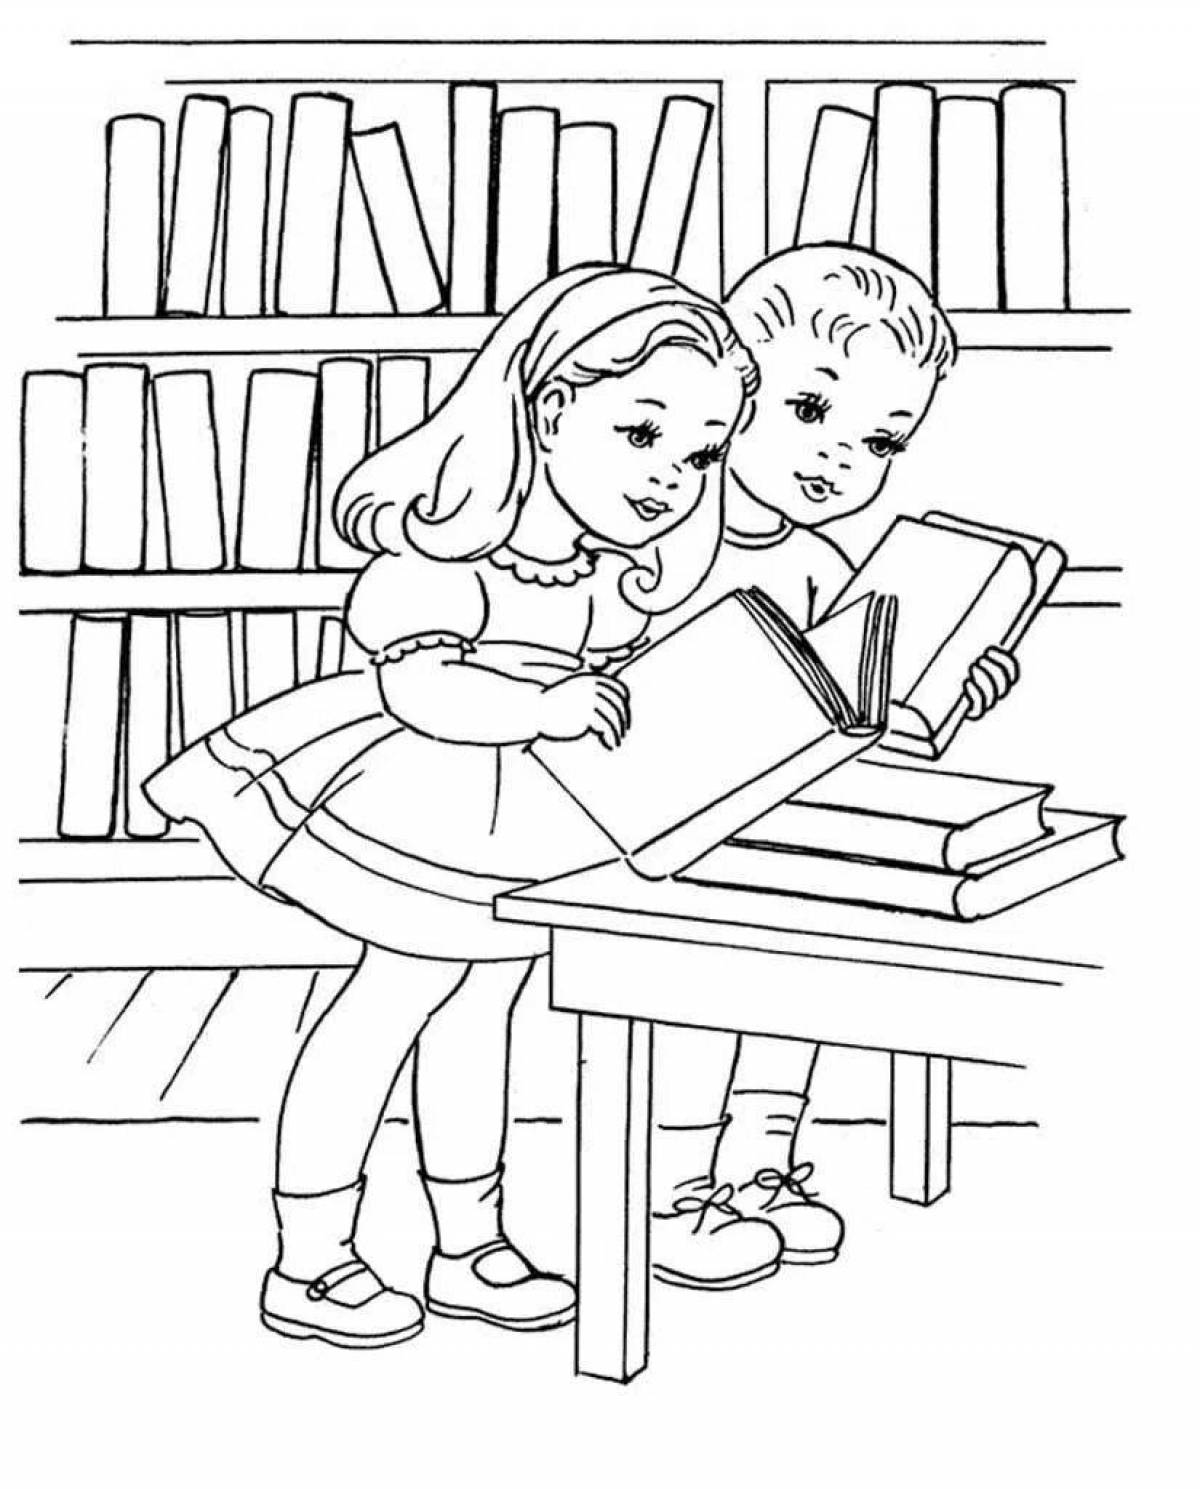 Colorful coloring page awe when learning is fun